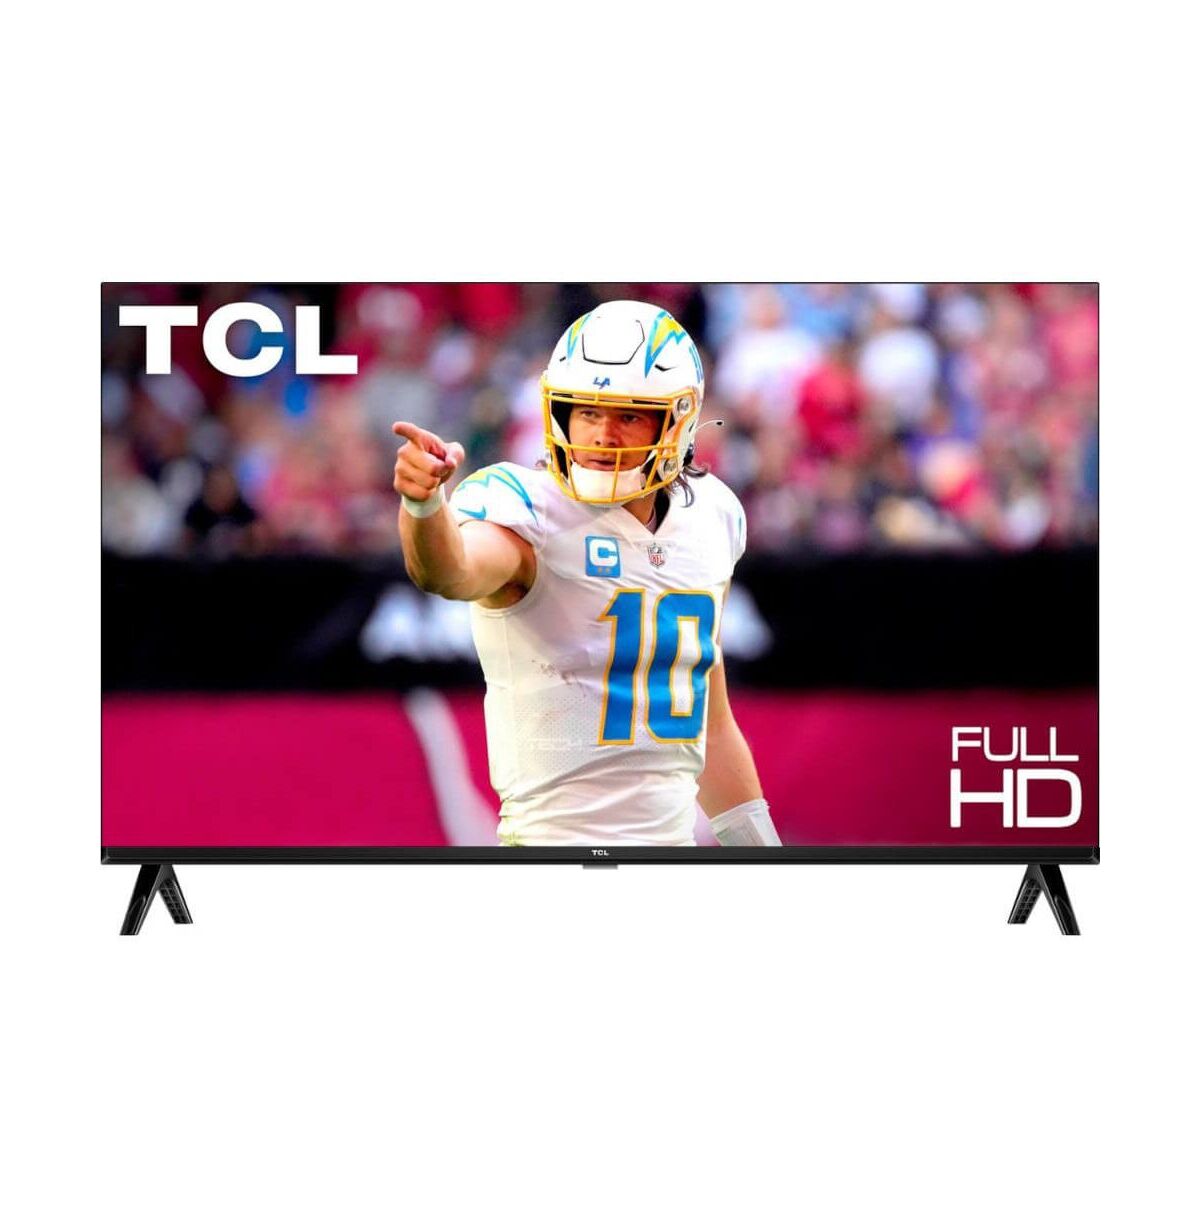 TCL 32 inch Class S3 1080p Led Hdr Smart Tv - 32S350G - Black